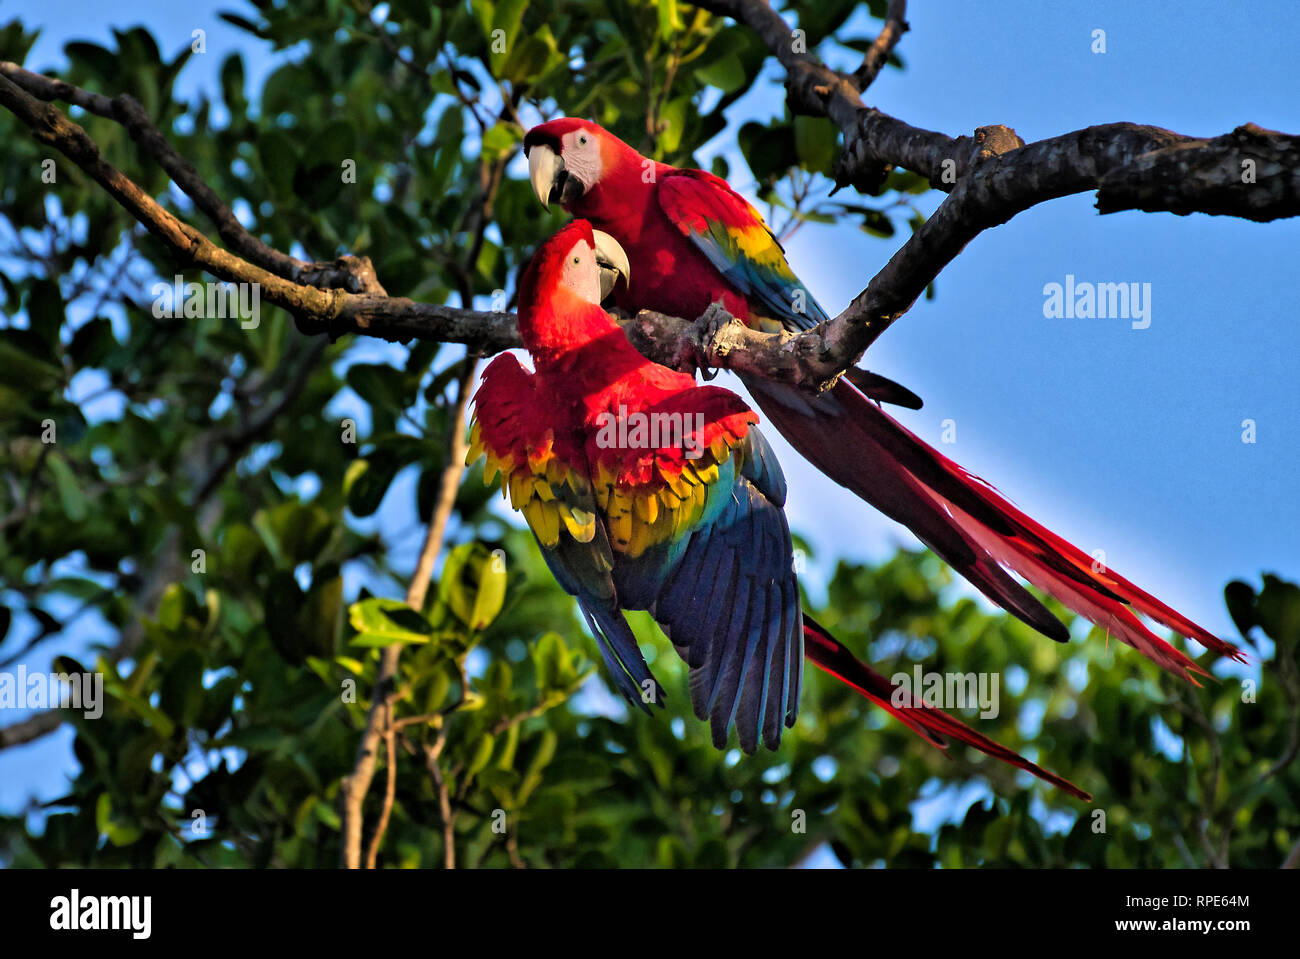 Pair of scarlet macaws, Ara macao these vibrant colored bird images where taken in Panama Stock Photo